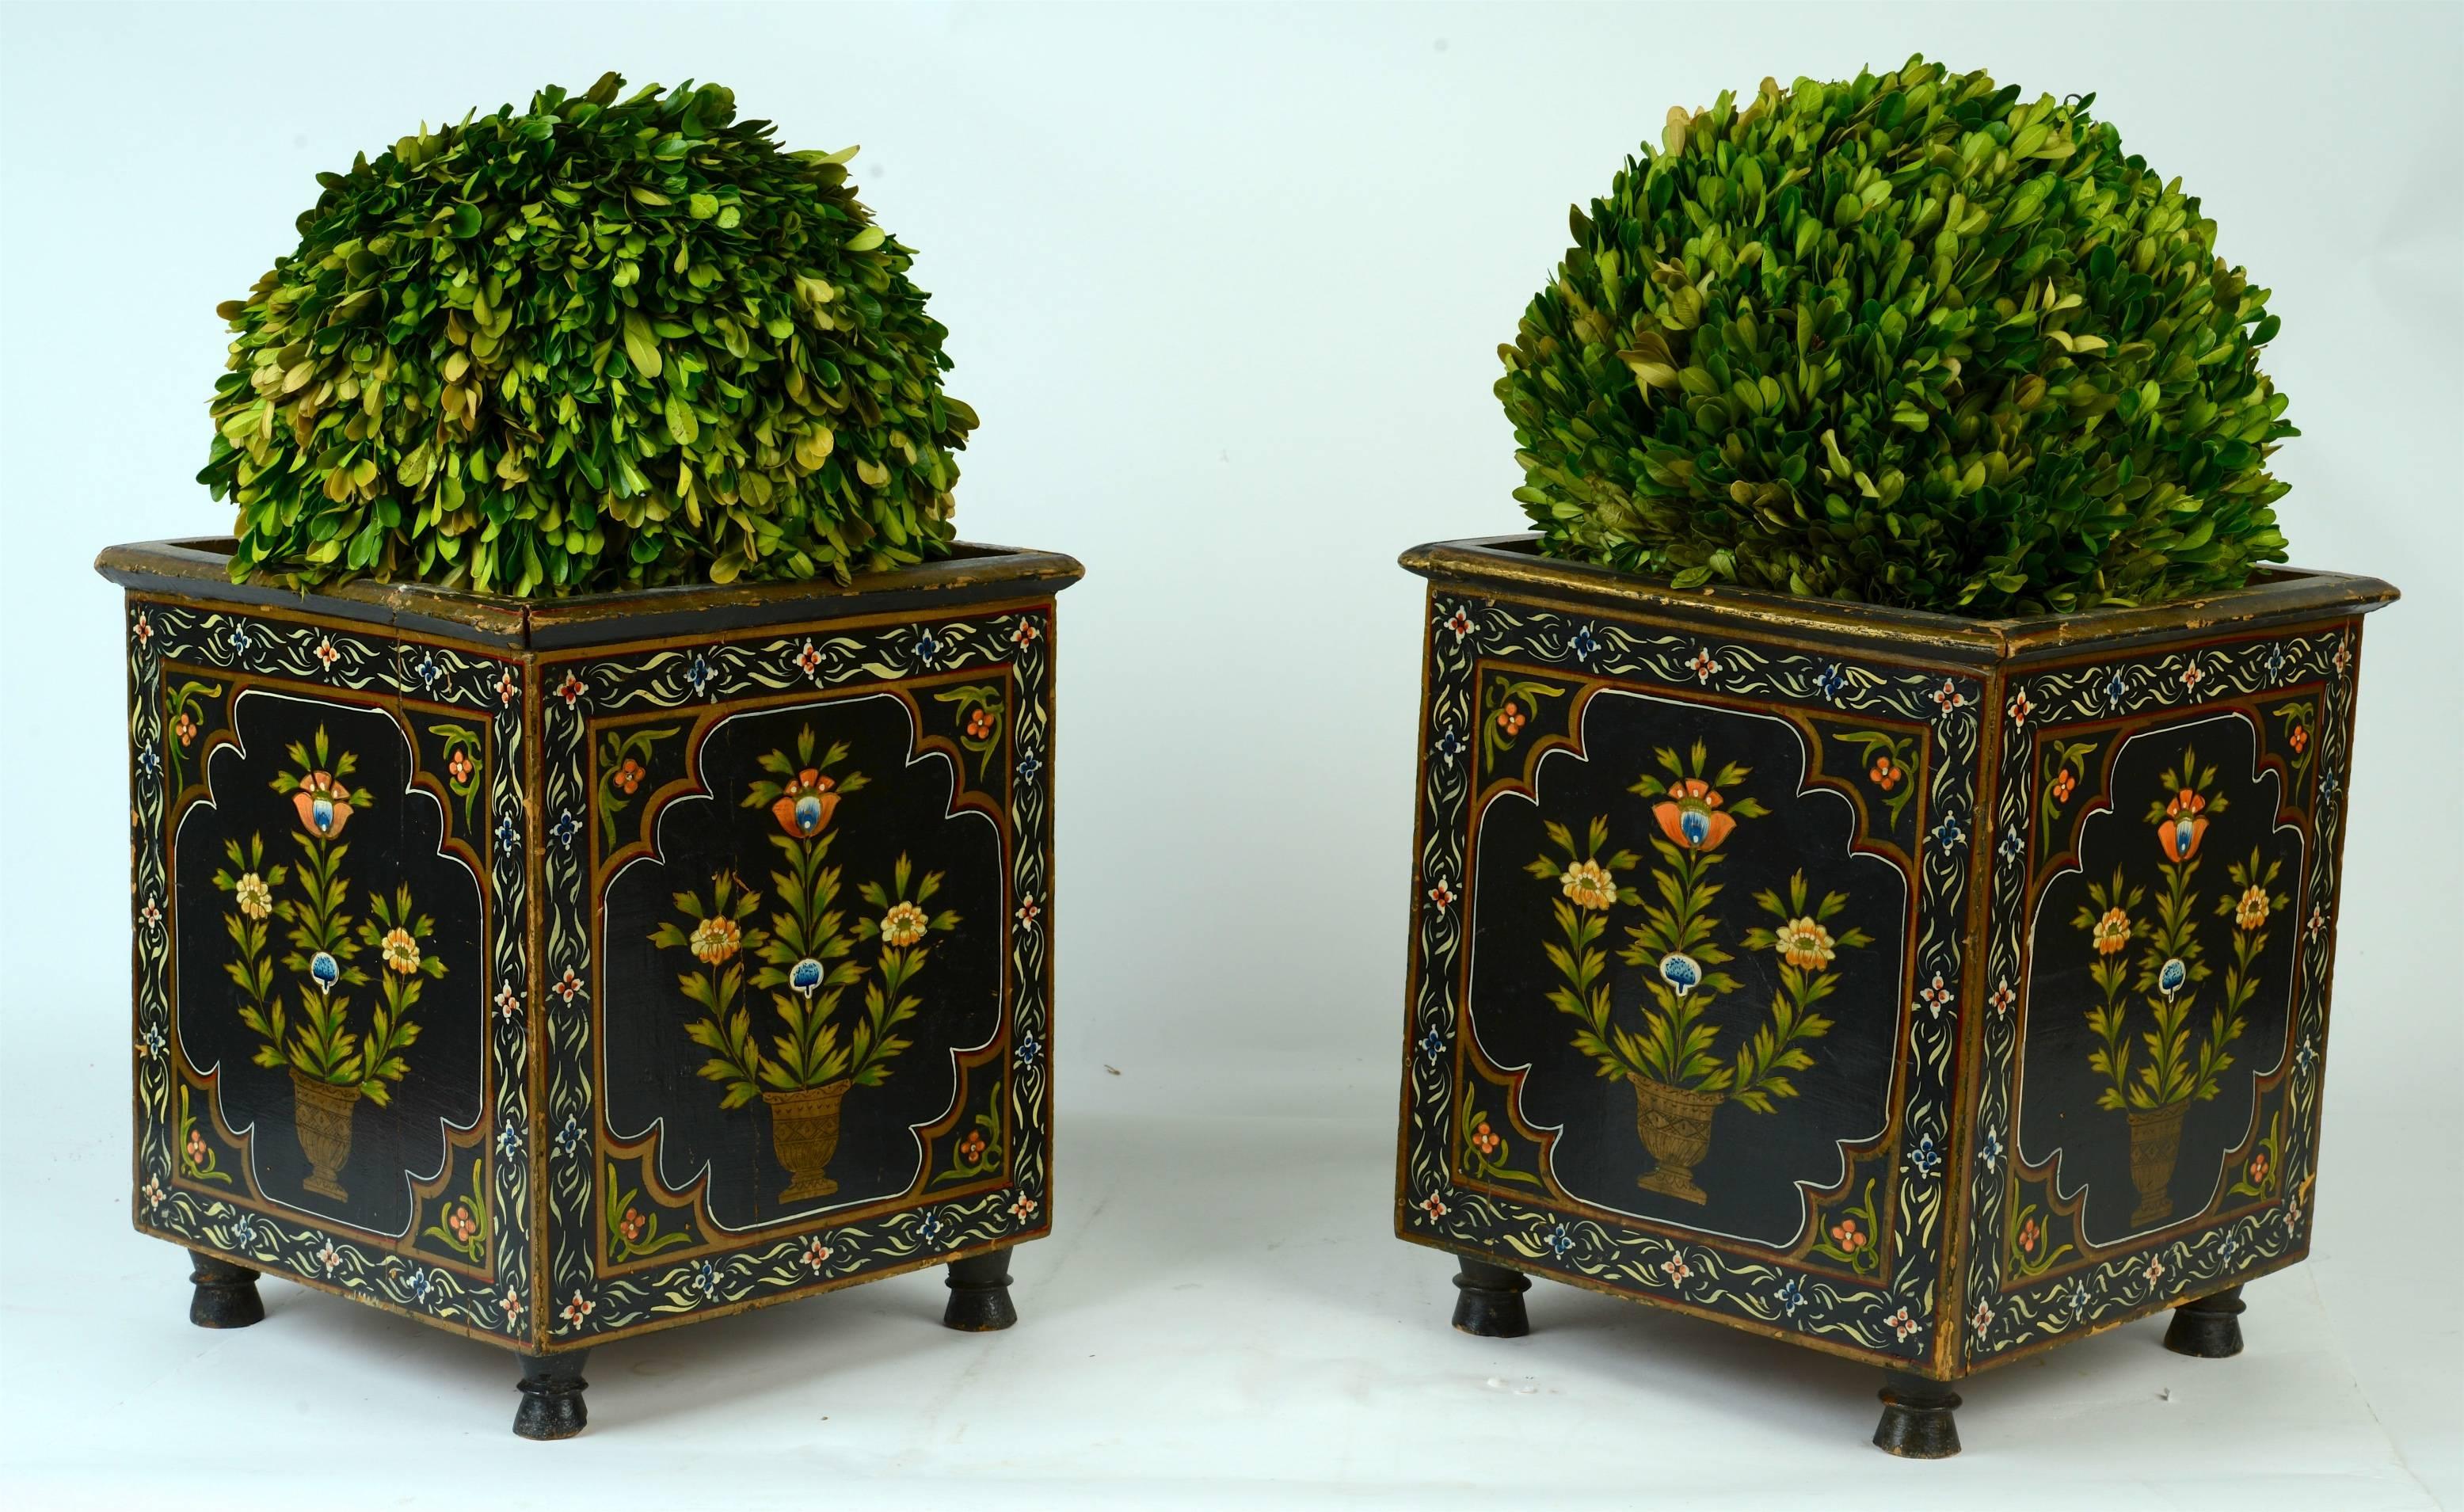 Pair of 19th c painted planters. The wood frames with original poly-chrome decoration of stylized flowers, are raised on turned feet. Both planters have custom-made tole liners. They appear to be Dutch. Topiaries are shown for reference and not